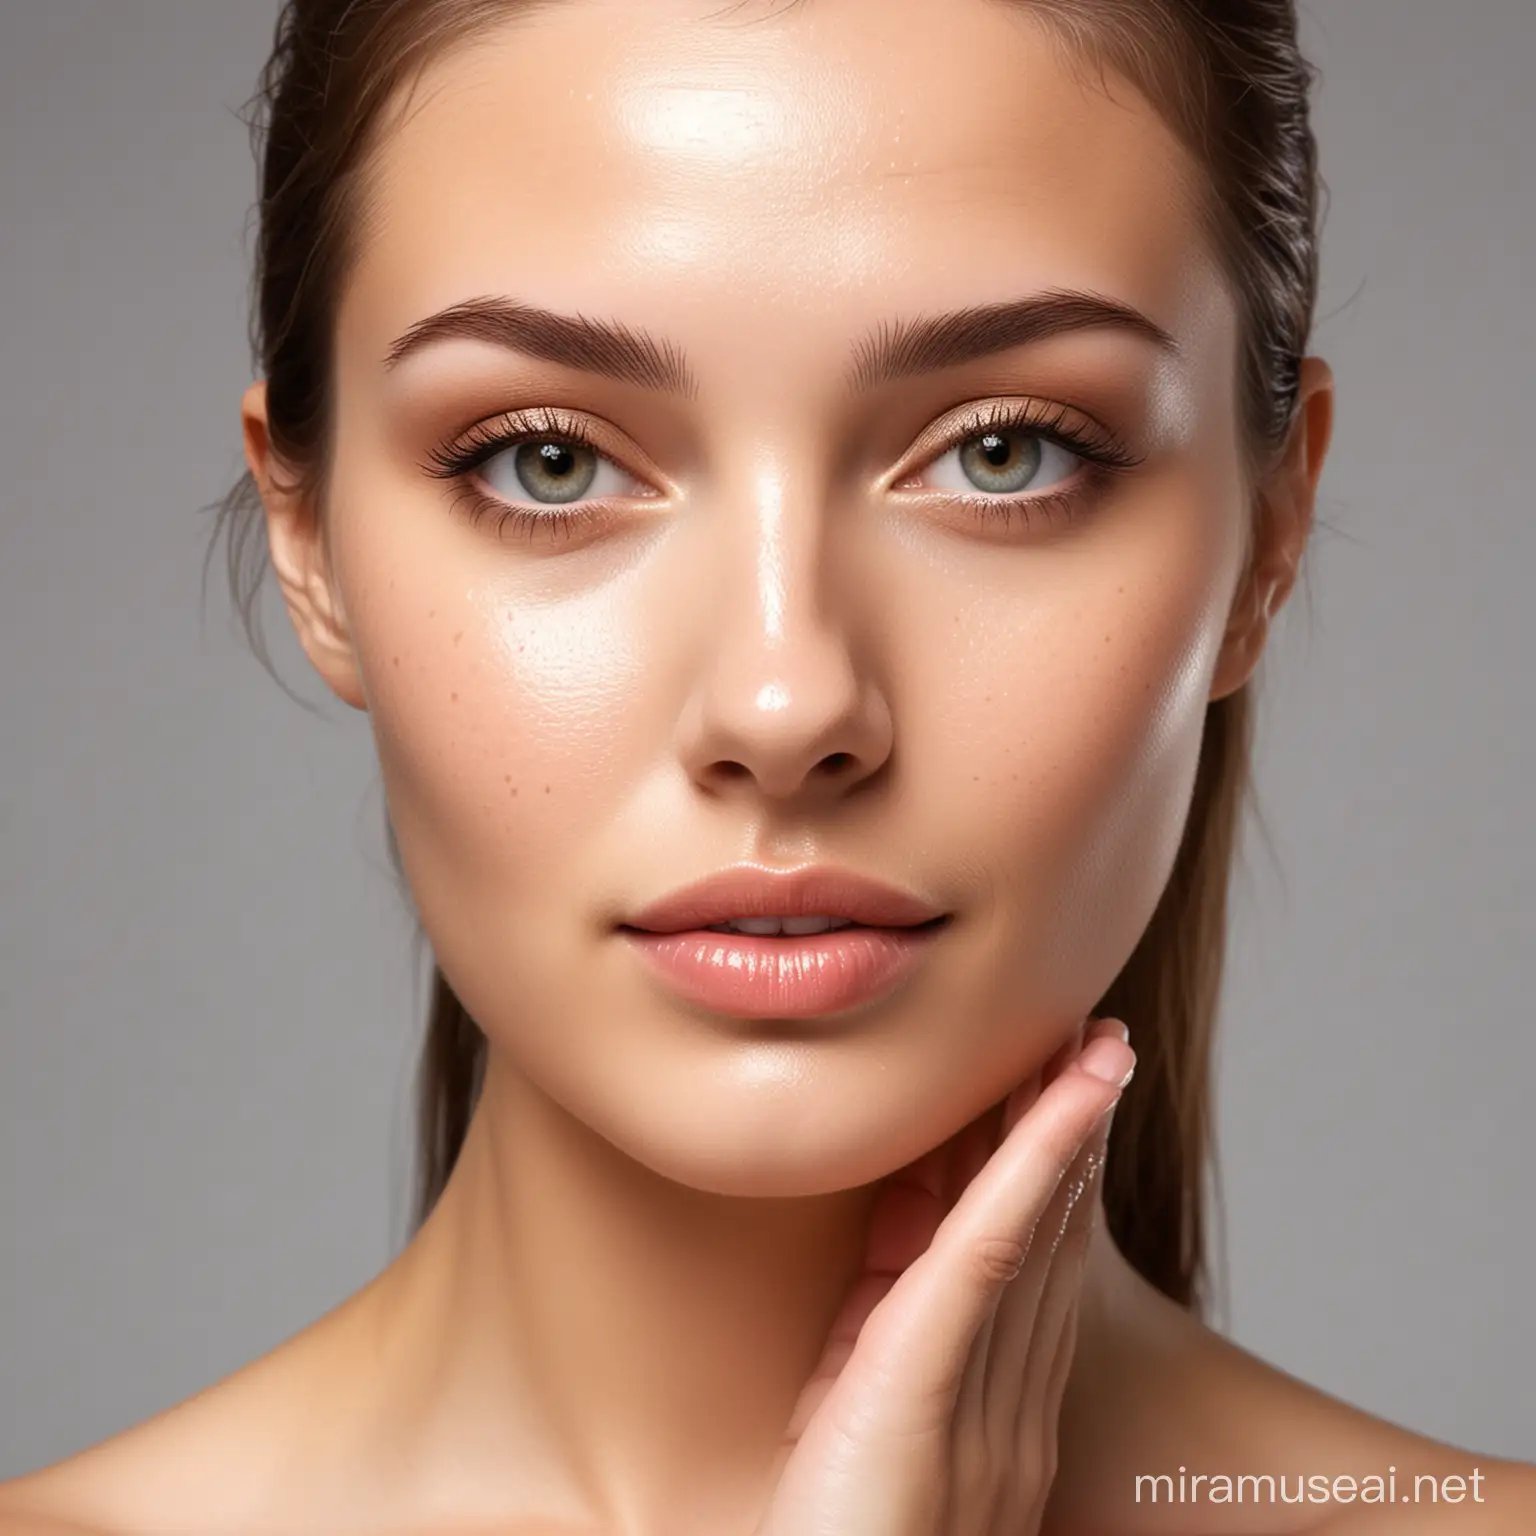 Radiant Skin Care Healthy Habits for Glowing Complexion